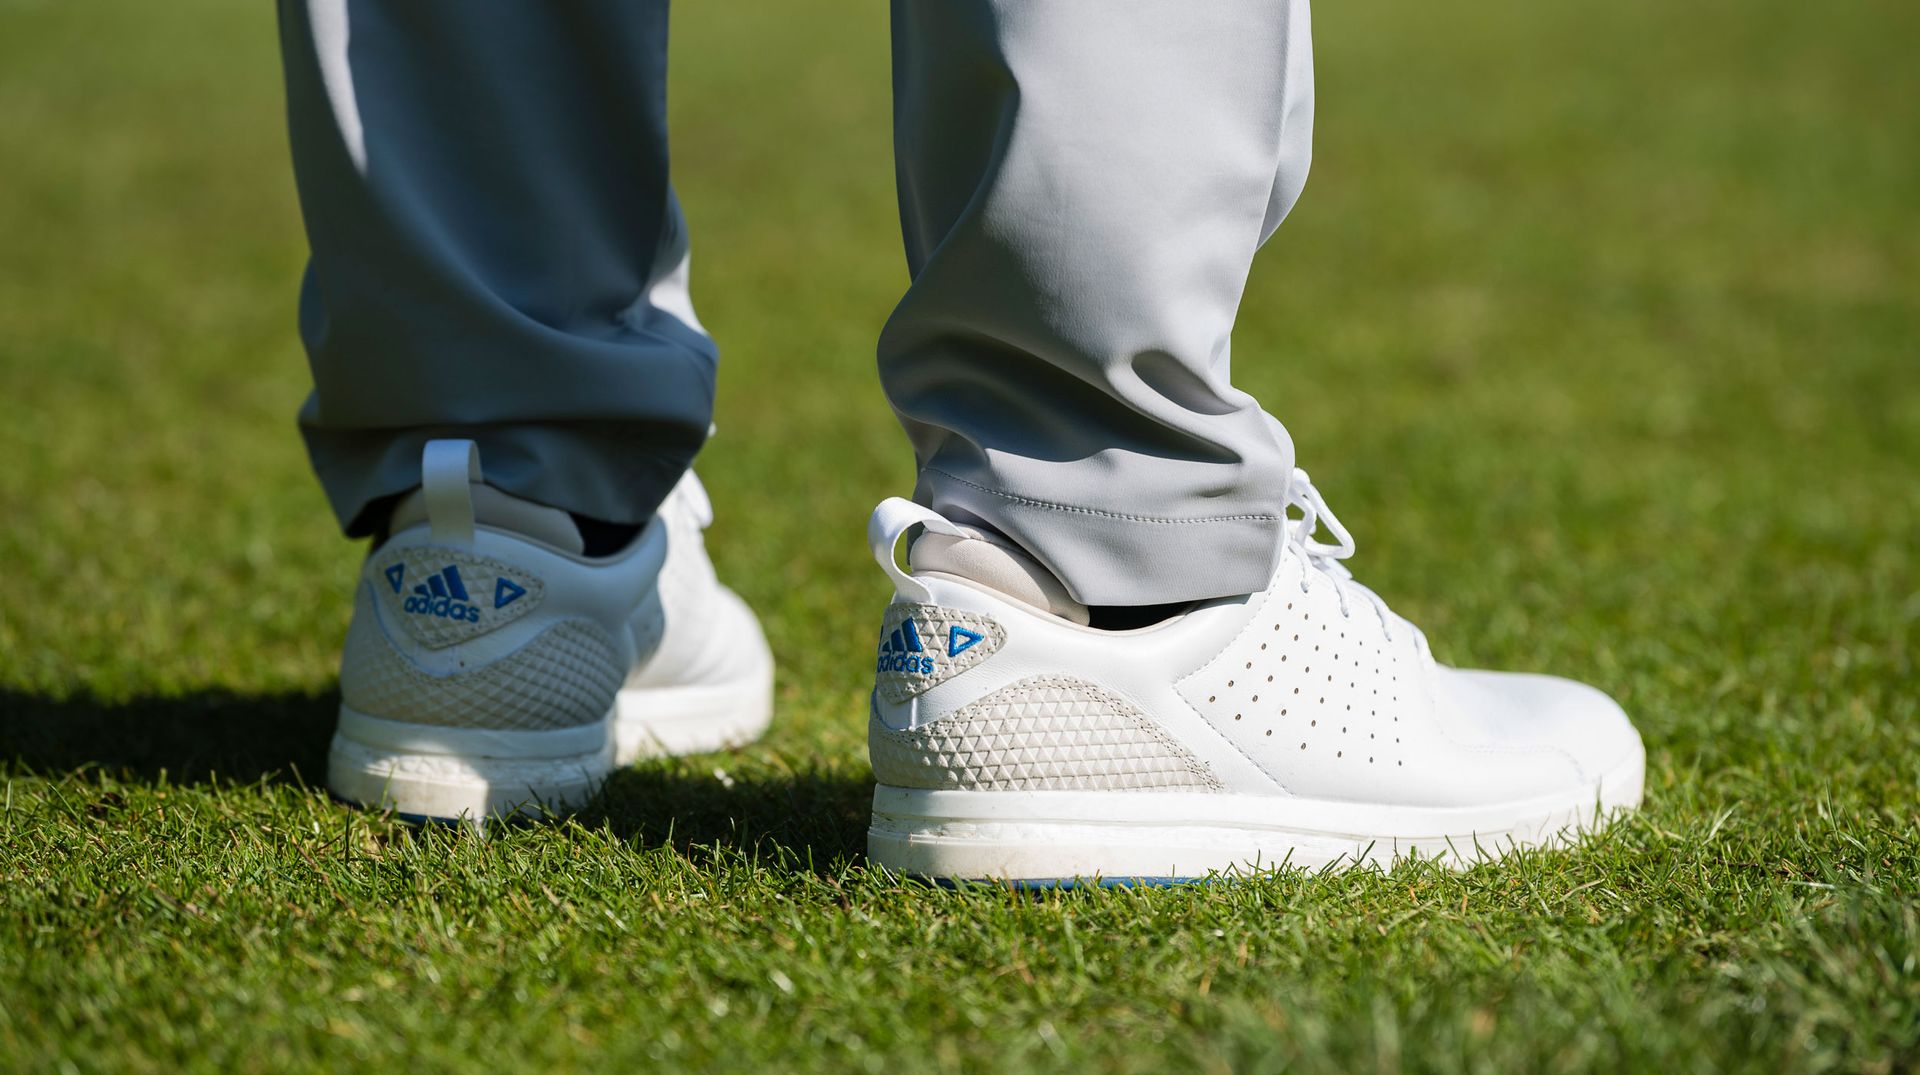 adidas Flopshot Golf Shoes Review | Golf Monthly